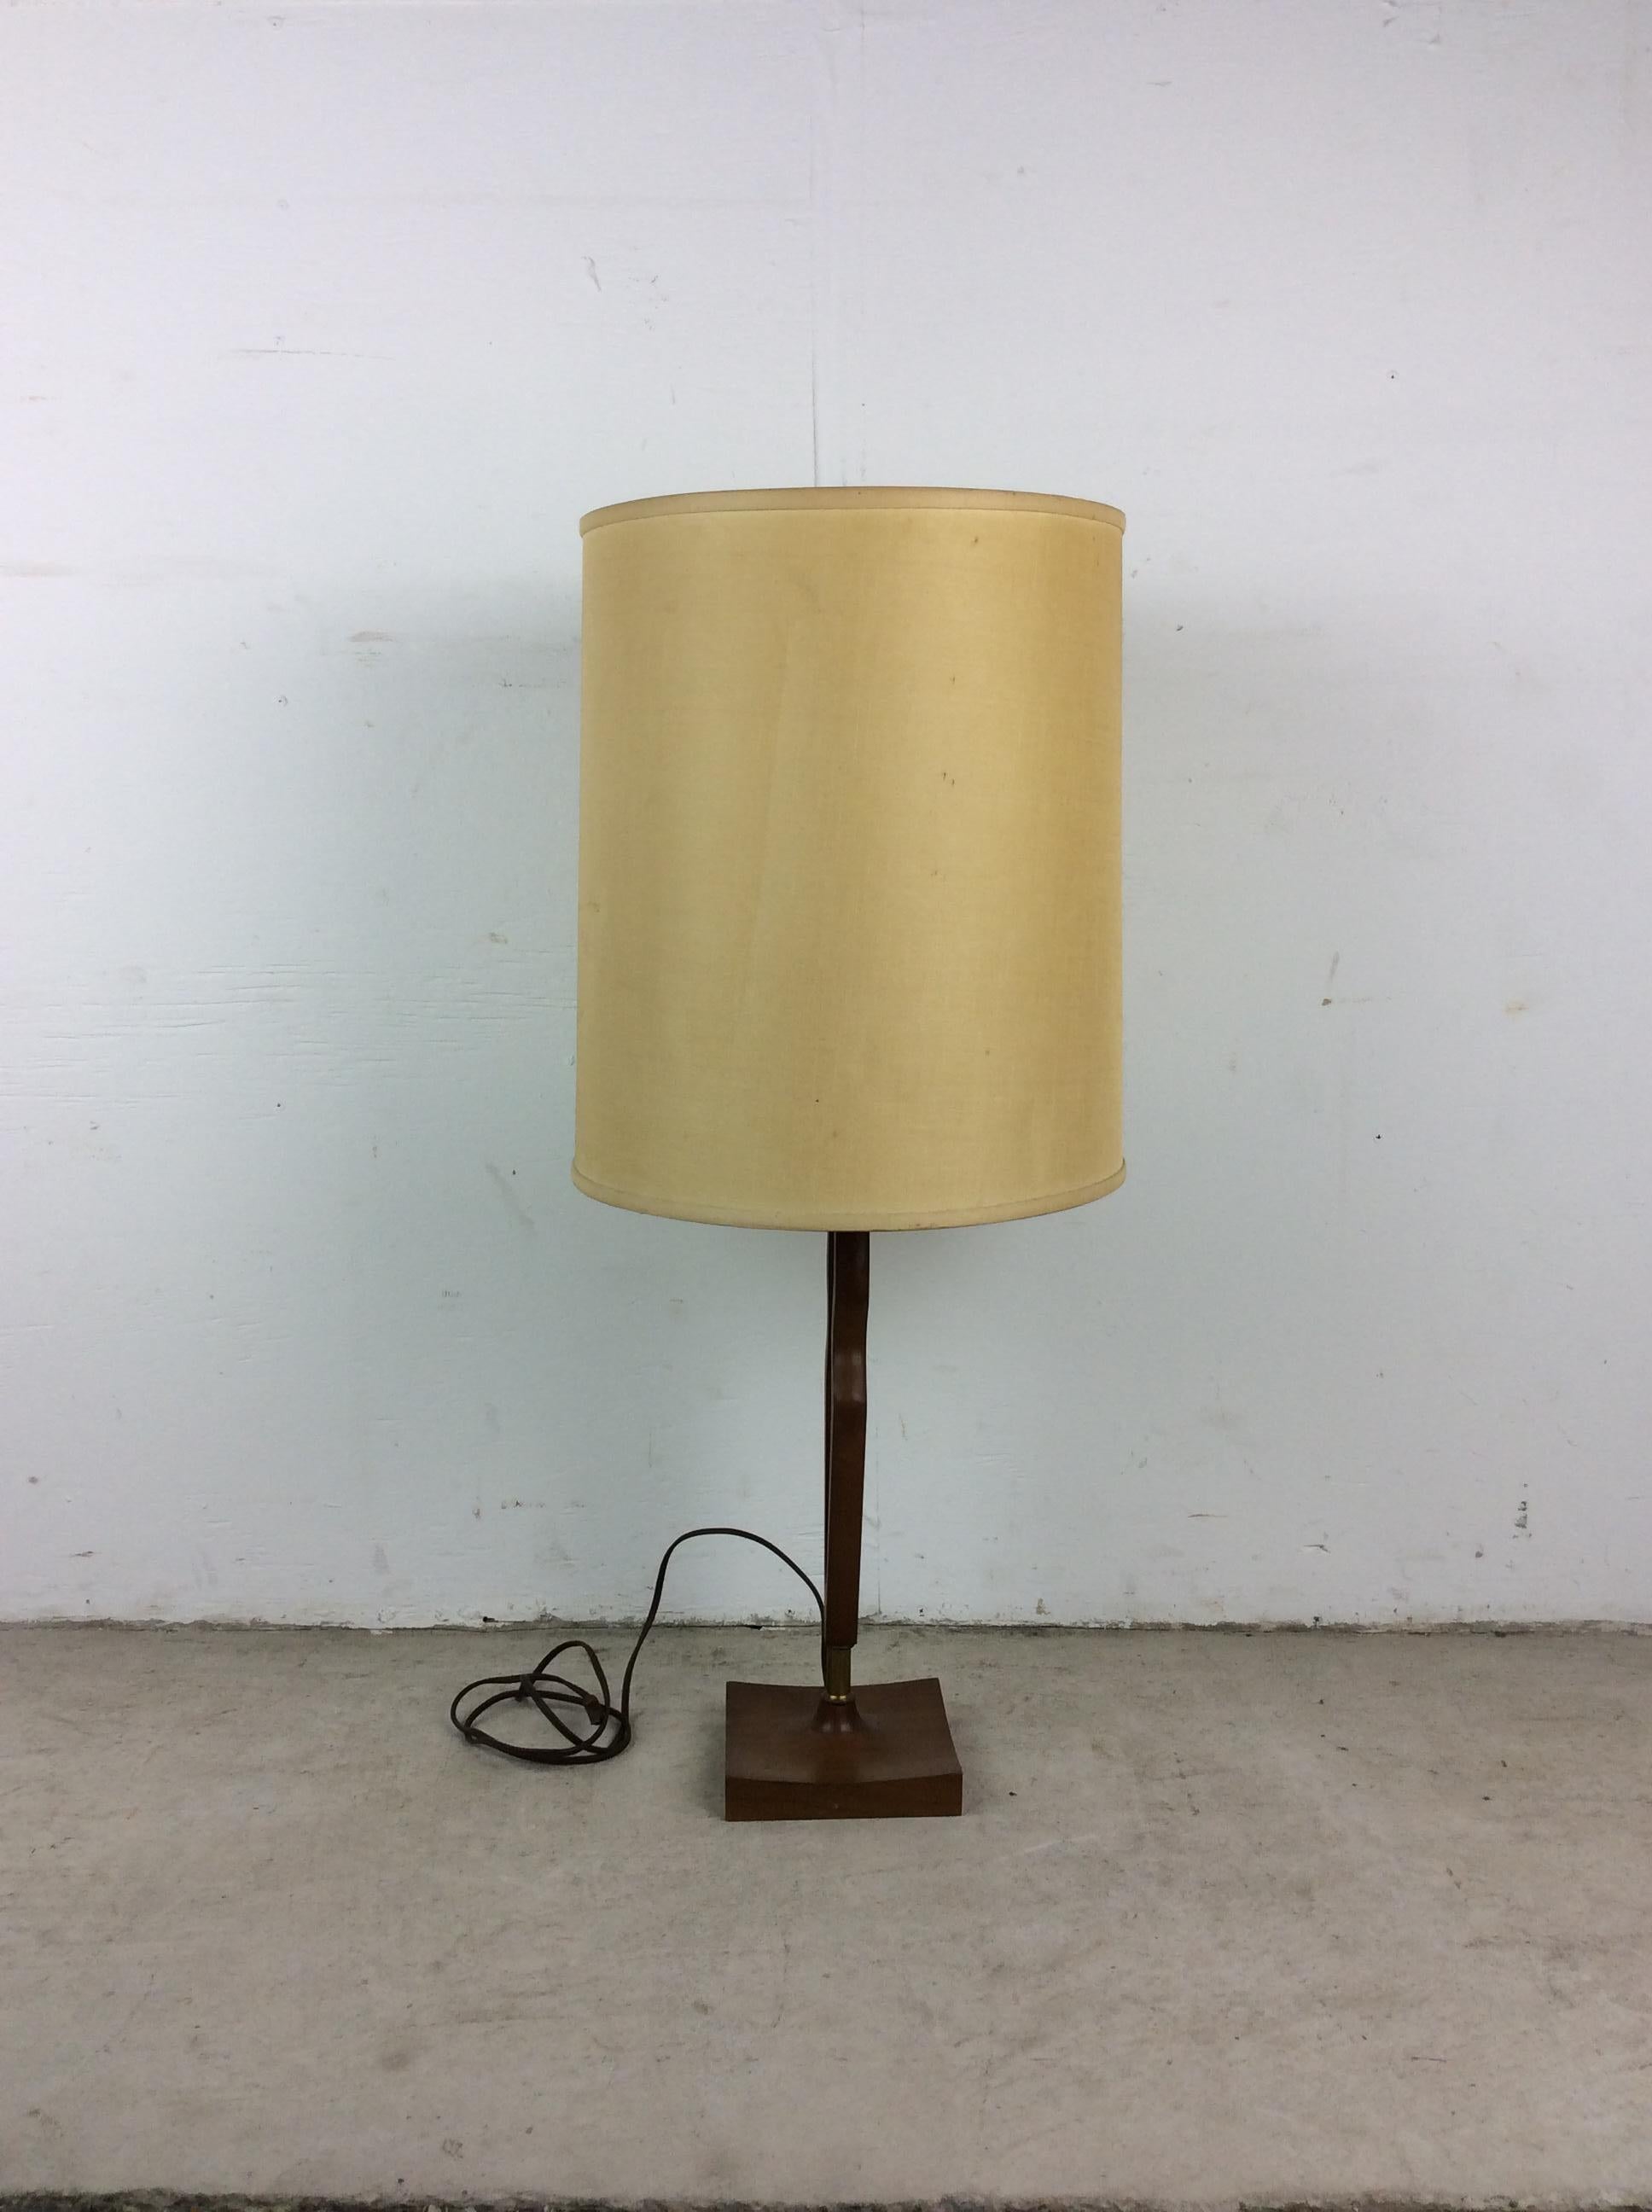 This mid century modern table lamp features unique walnut construction with brass accent and vintage barrel shade.

 Dimensions: 6w 6d 30h
Measurements do not include shade.

Condition: Original wiring works. Vintage shade is in fair condition. The